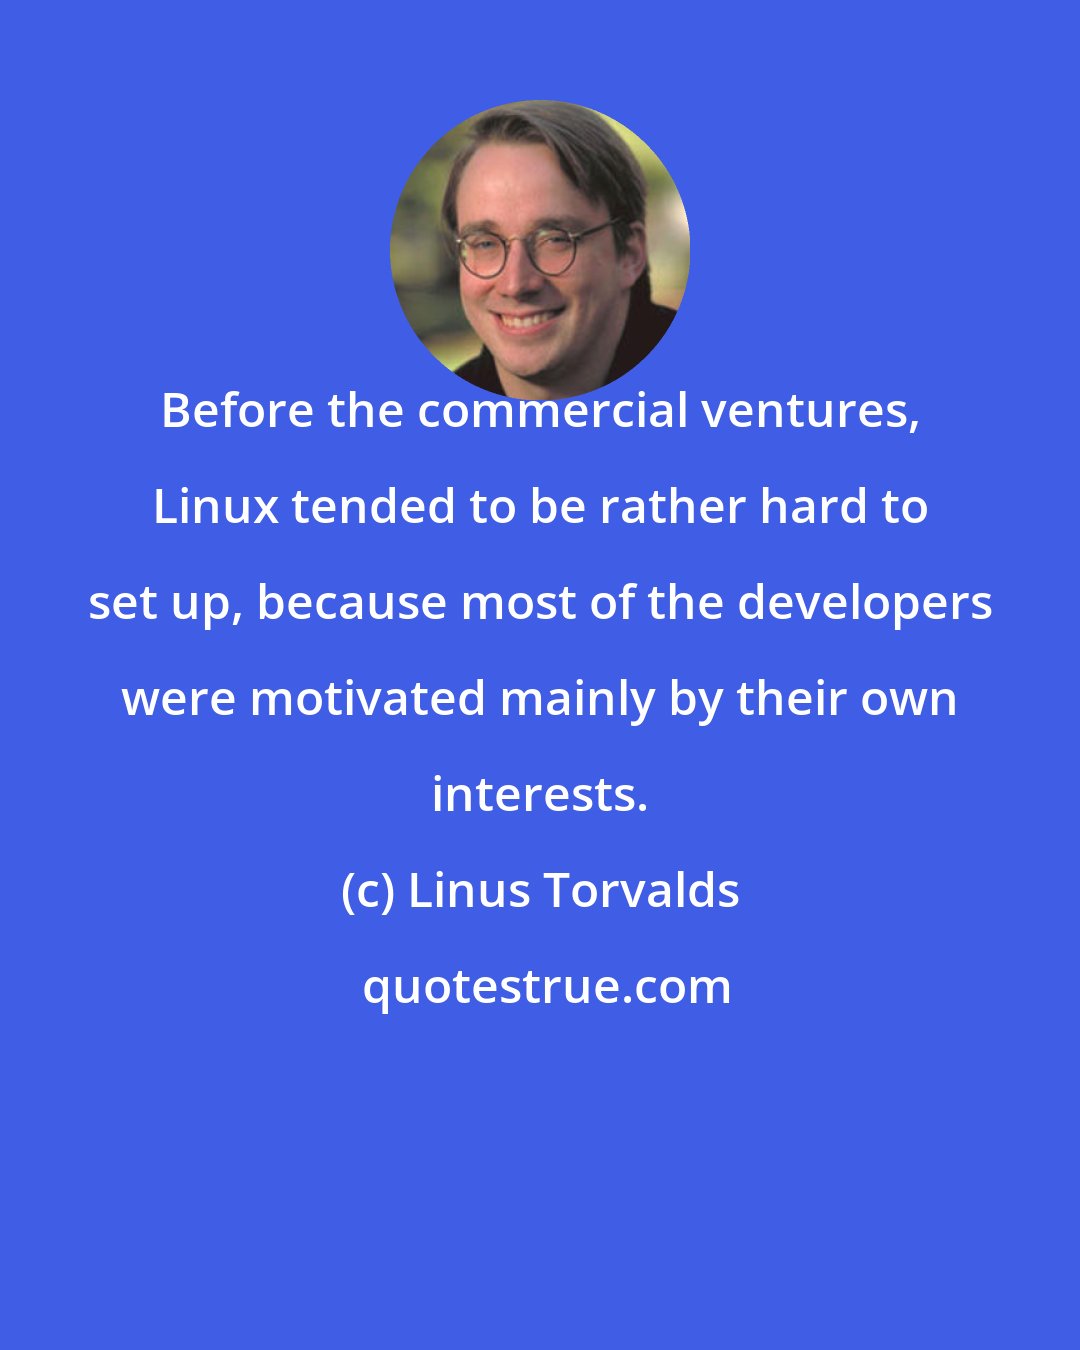 Linus Torvalds: Before the commercial ventures, Linux tended to be rather hard to set up, because most of the developers were motivated mainly by their own interests.